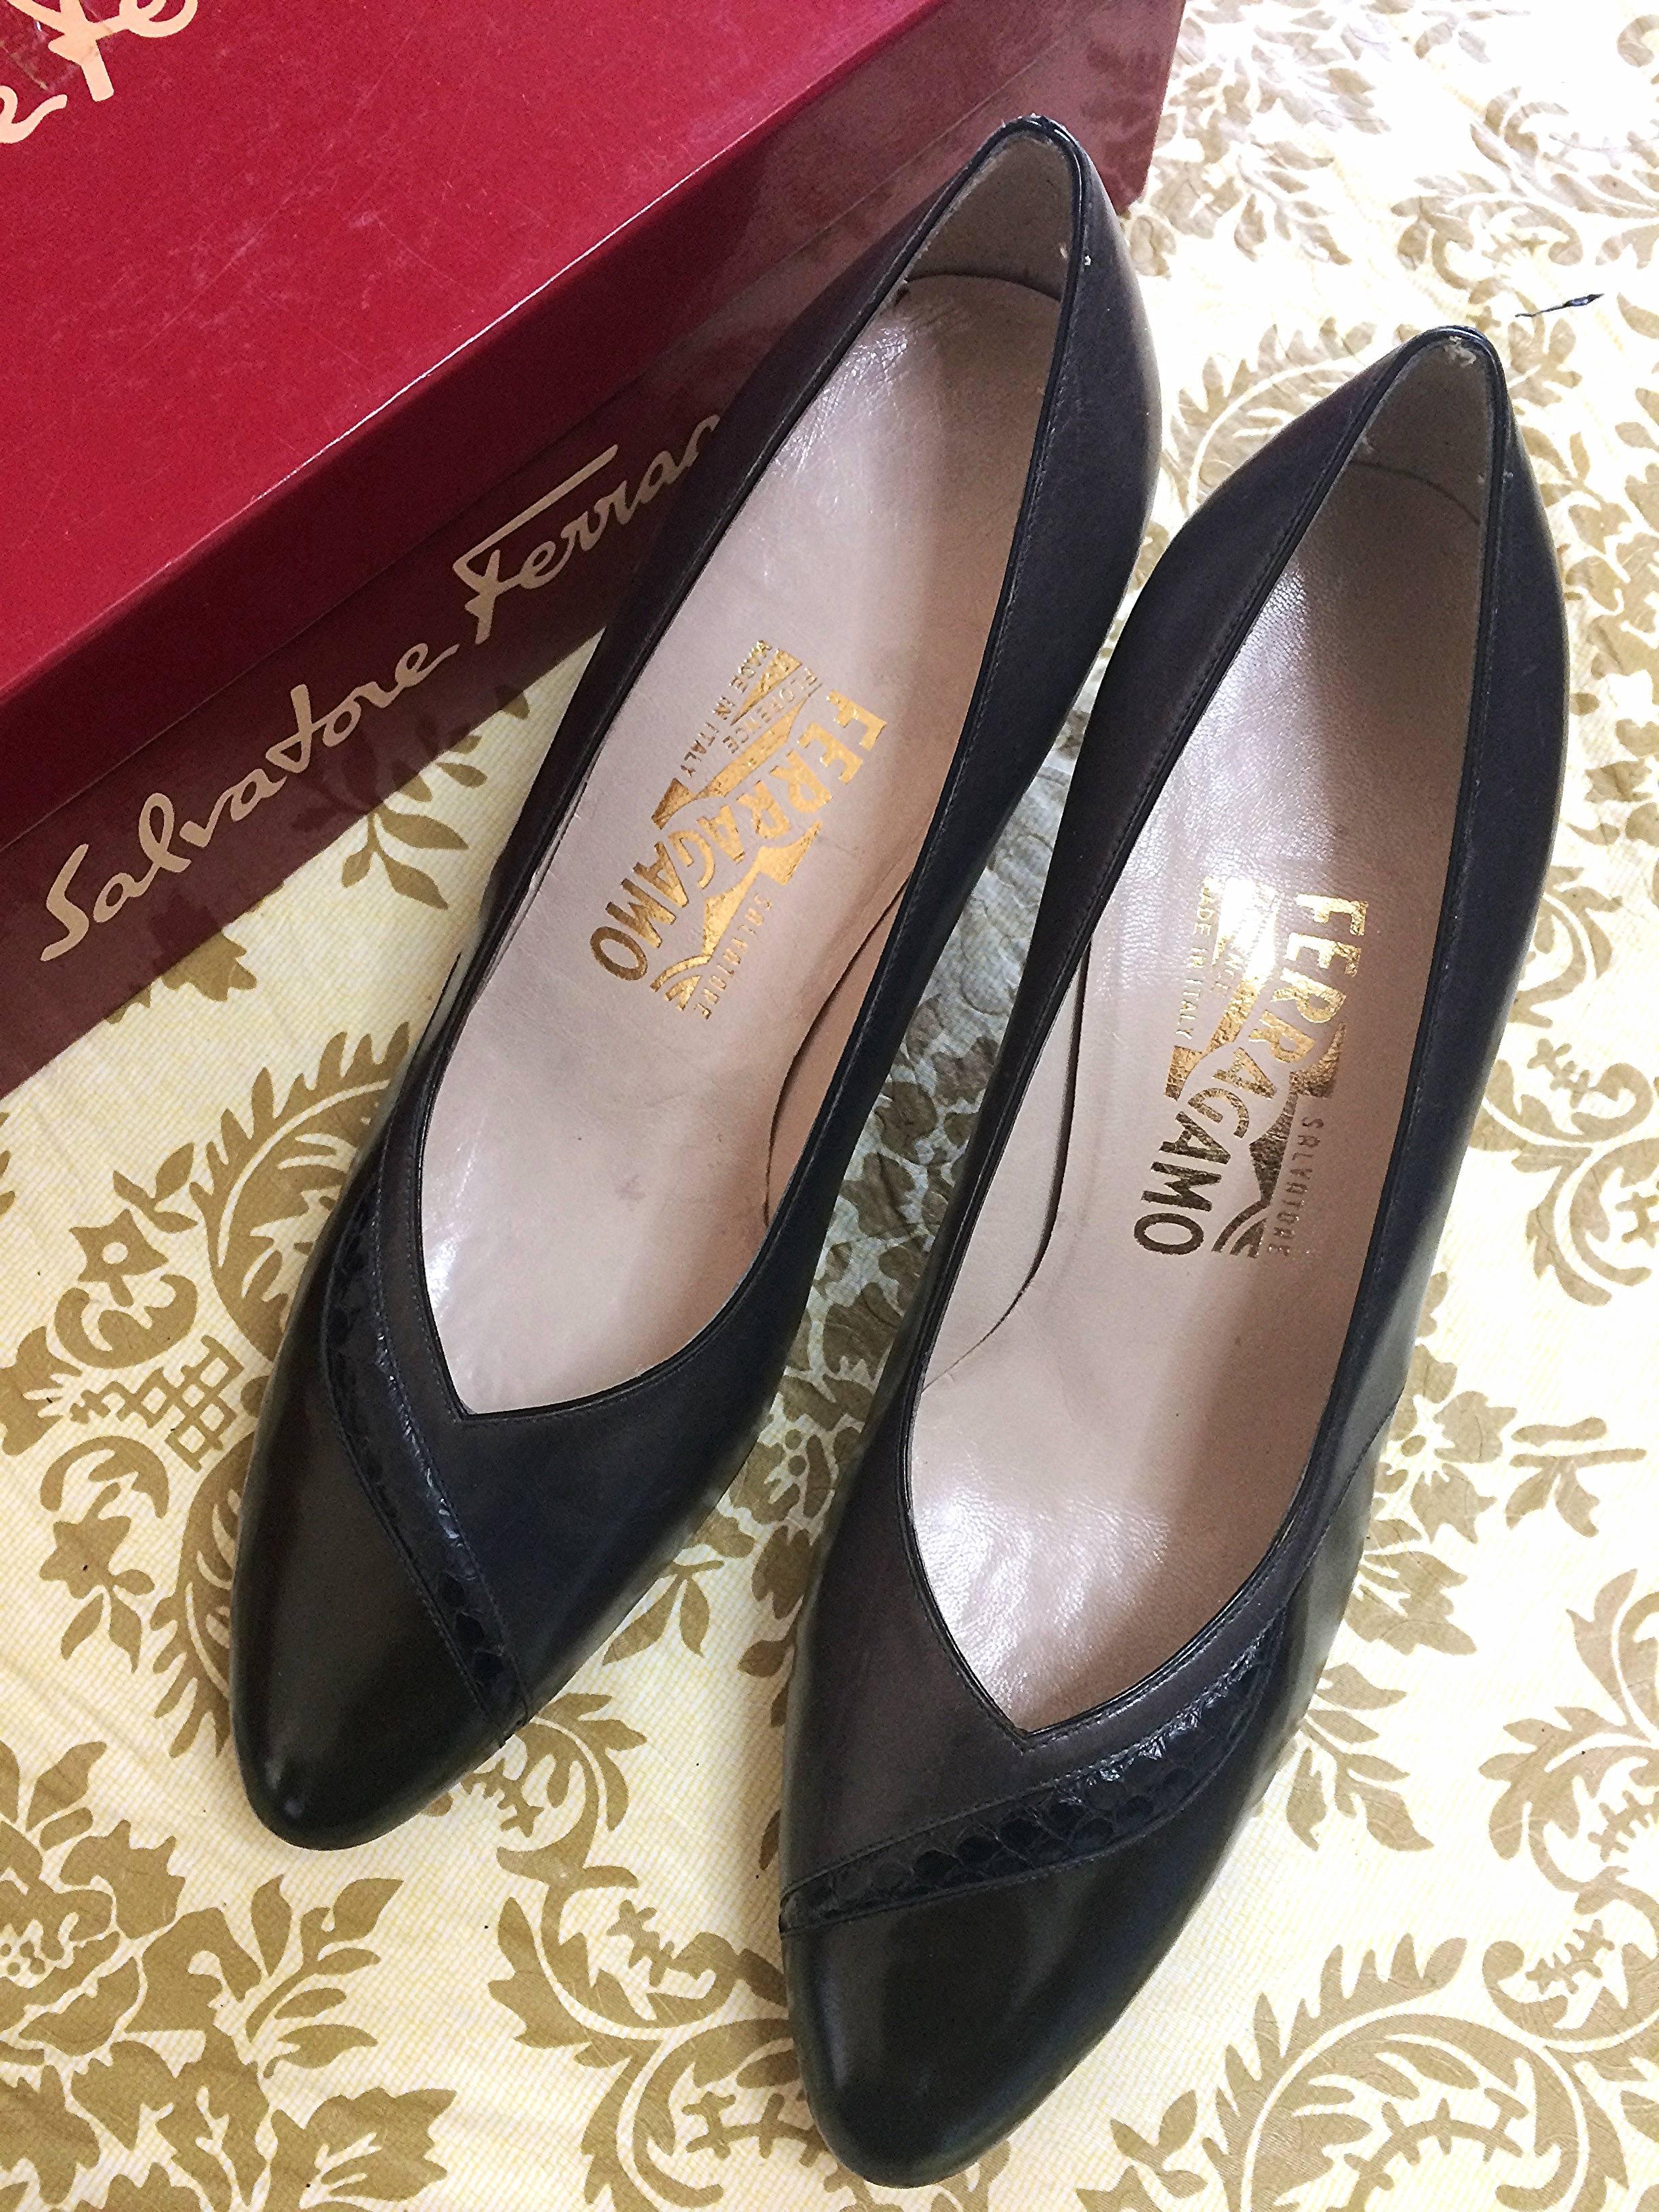 1990s. Vintage Salvatore Ferragamo charcoal grey and dark brown leather pumps with snakeskin, classic pointy heel shoes. US 8D

This is a classic vintage leather pumps from Salvatore Ferragamo from the 90s. 
Featuring dark brown and charcoal grey